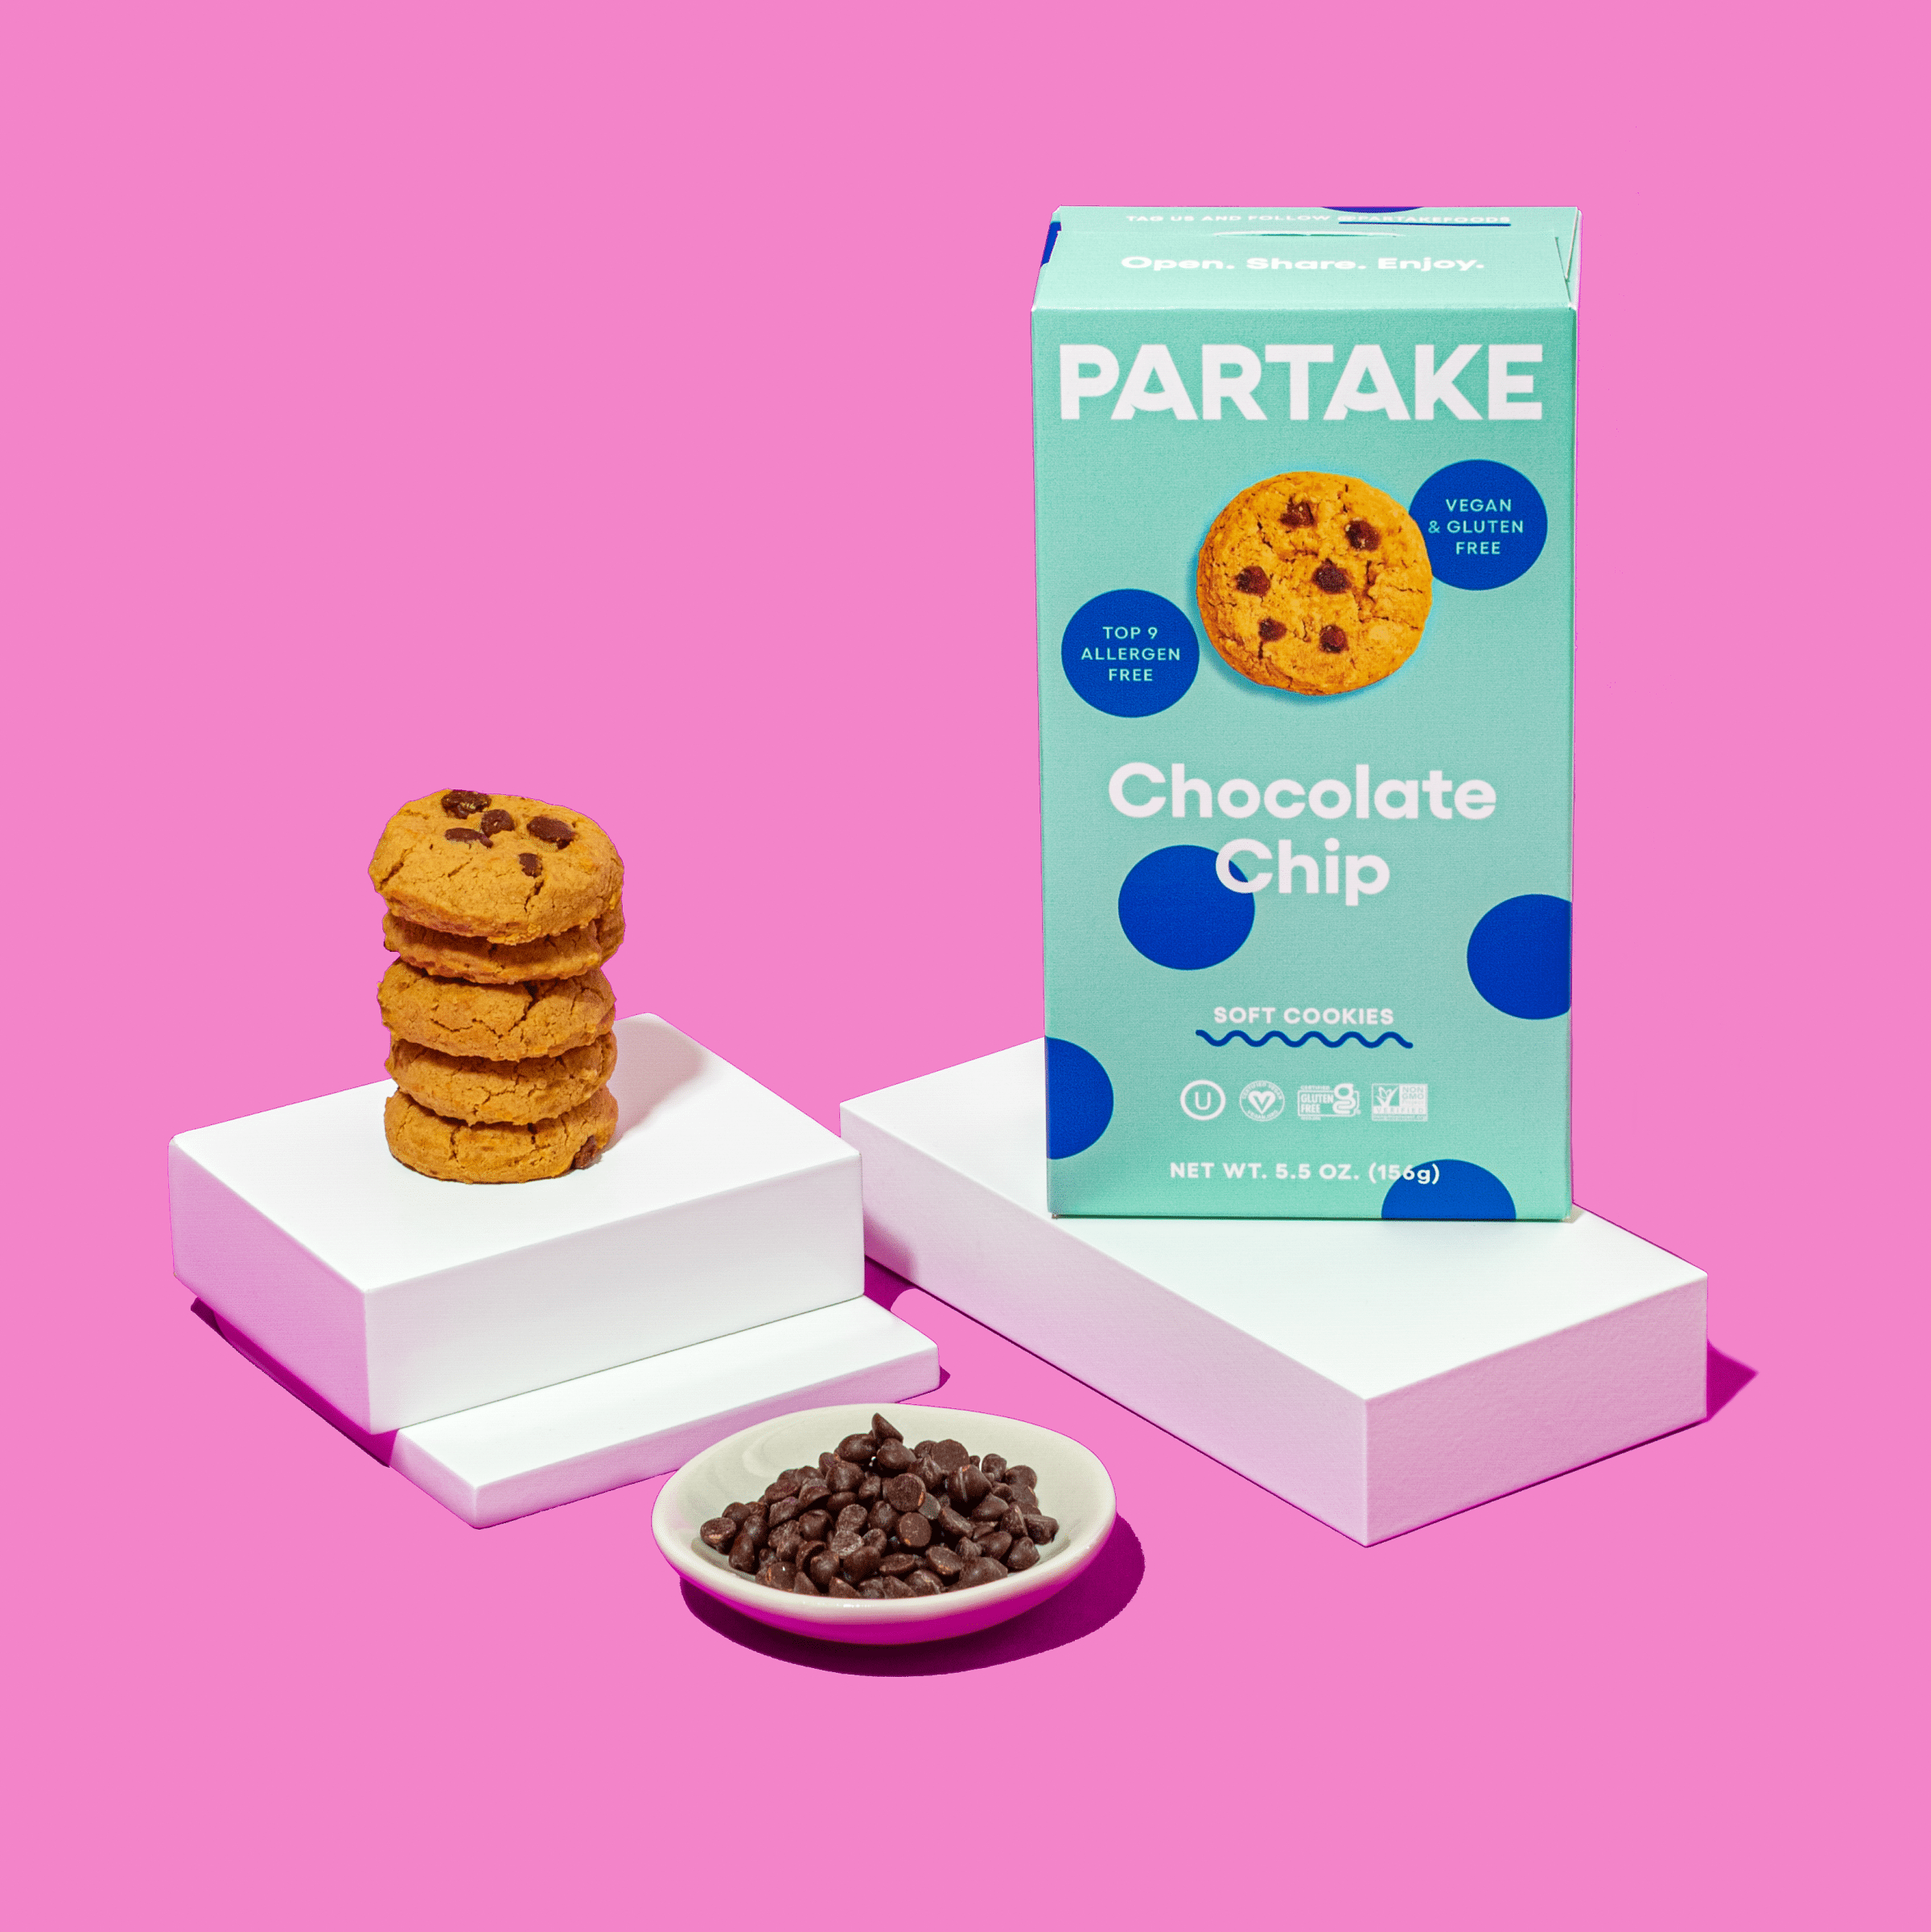 Partake Soft Baked Chocolate Chip Cookies